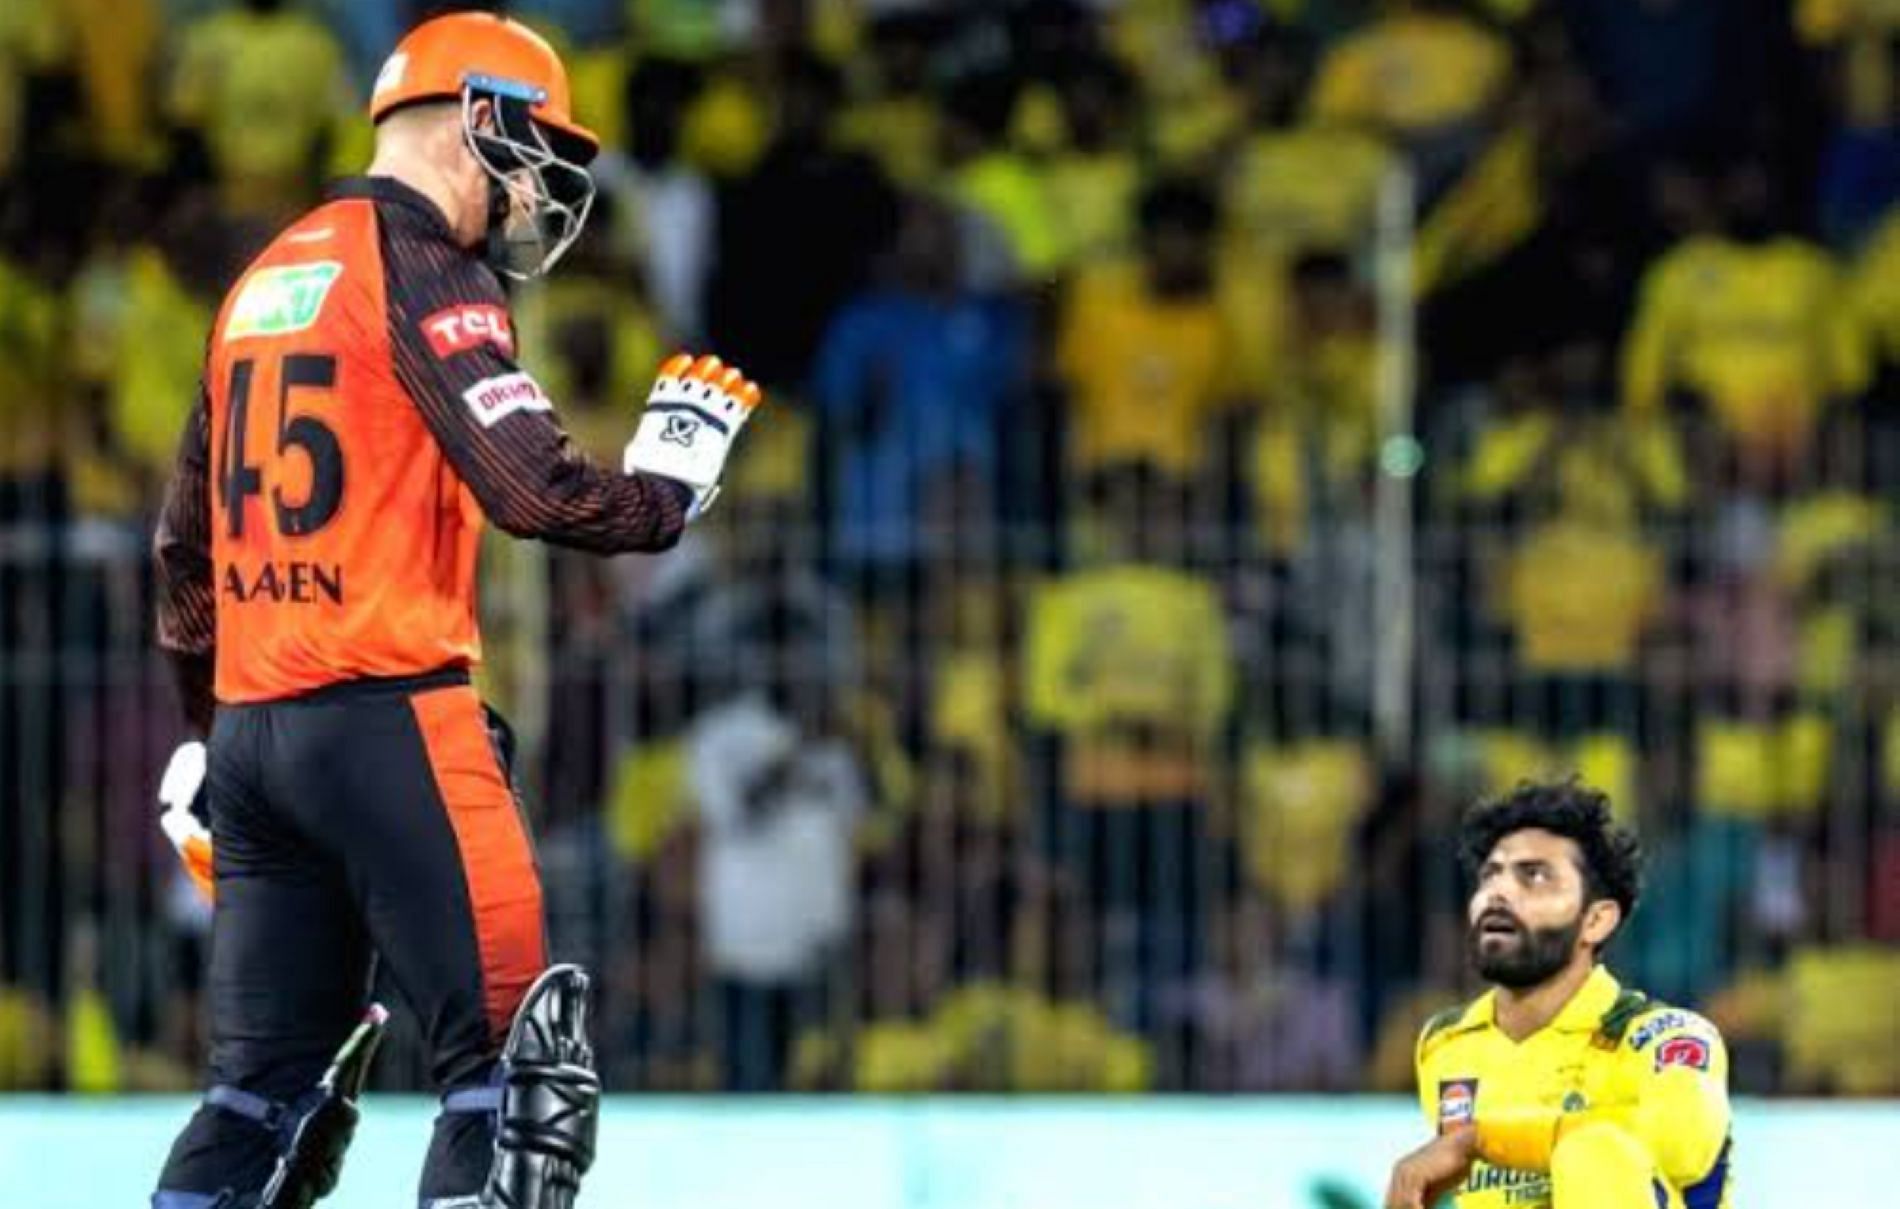 Klaasen will likely have a massive say in the CSK-SRH clash [Credit: SRHfans Twitter handle]